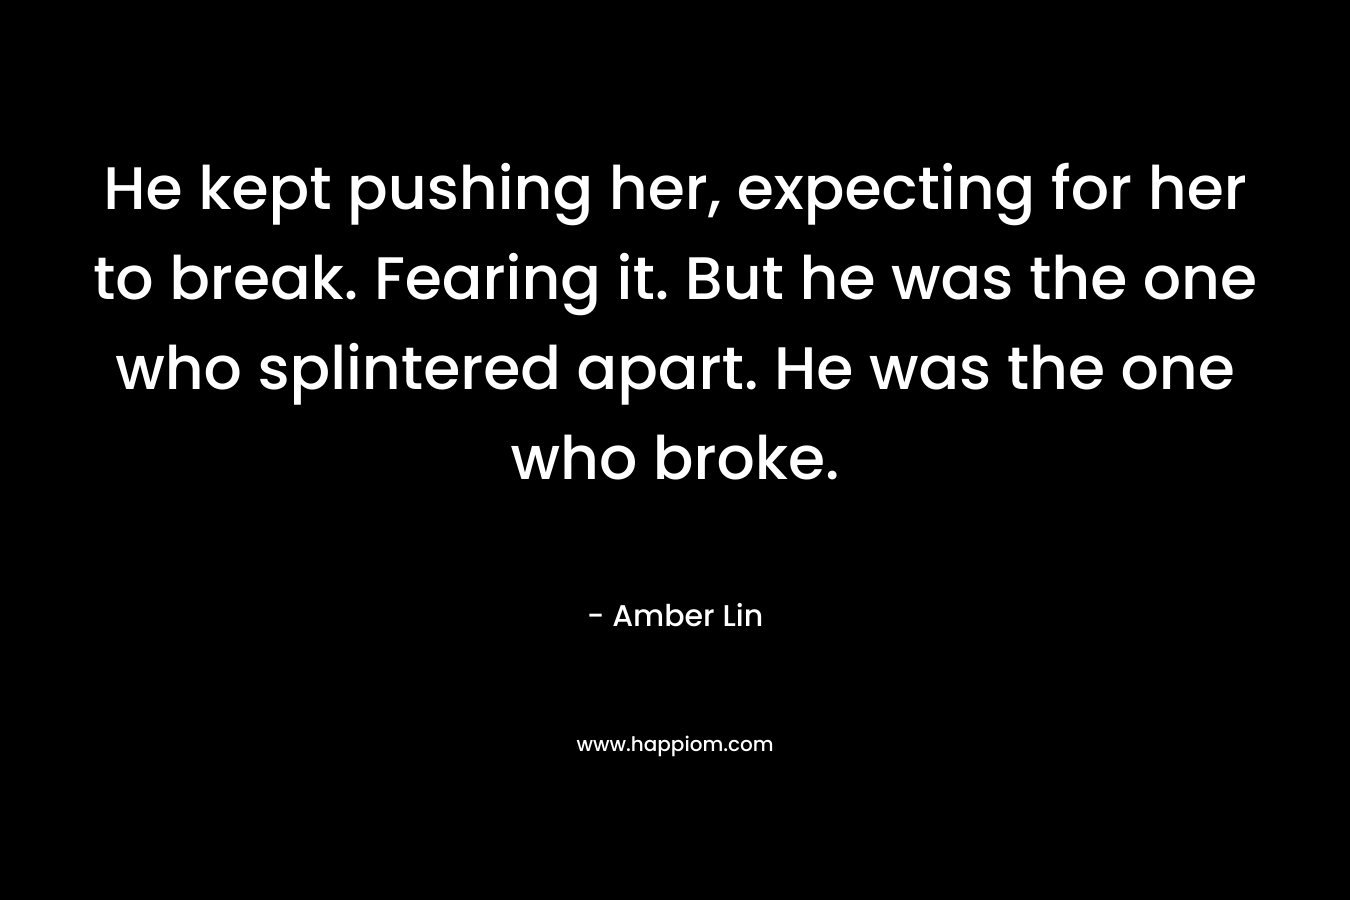 He kept pushing her, expecting for her to break. Fearing it. But he was the one who splintered apart. He was the one who broke. – Amber Lin